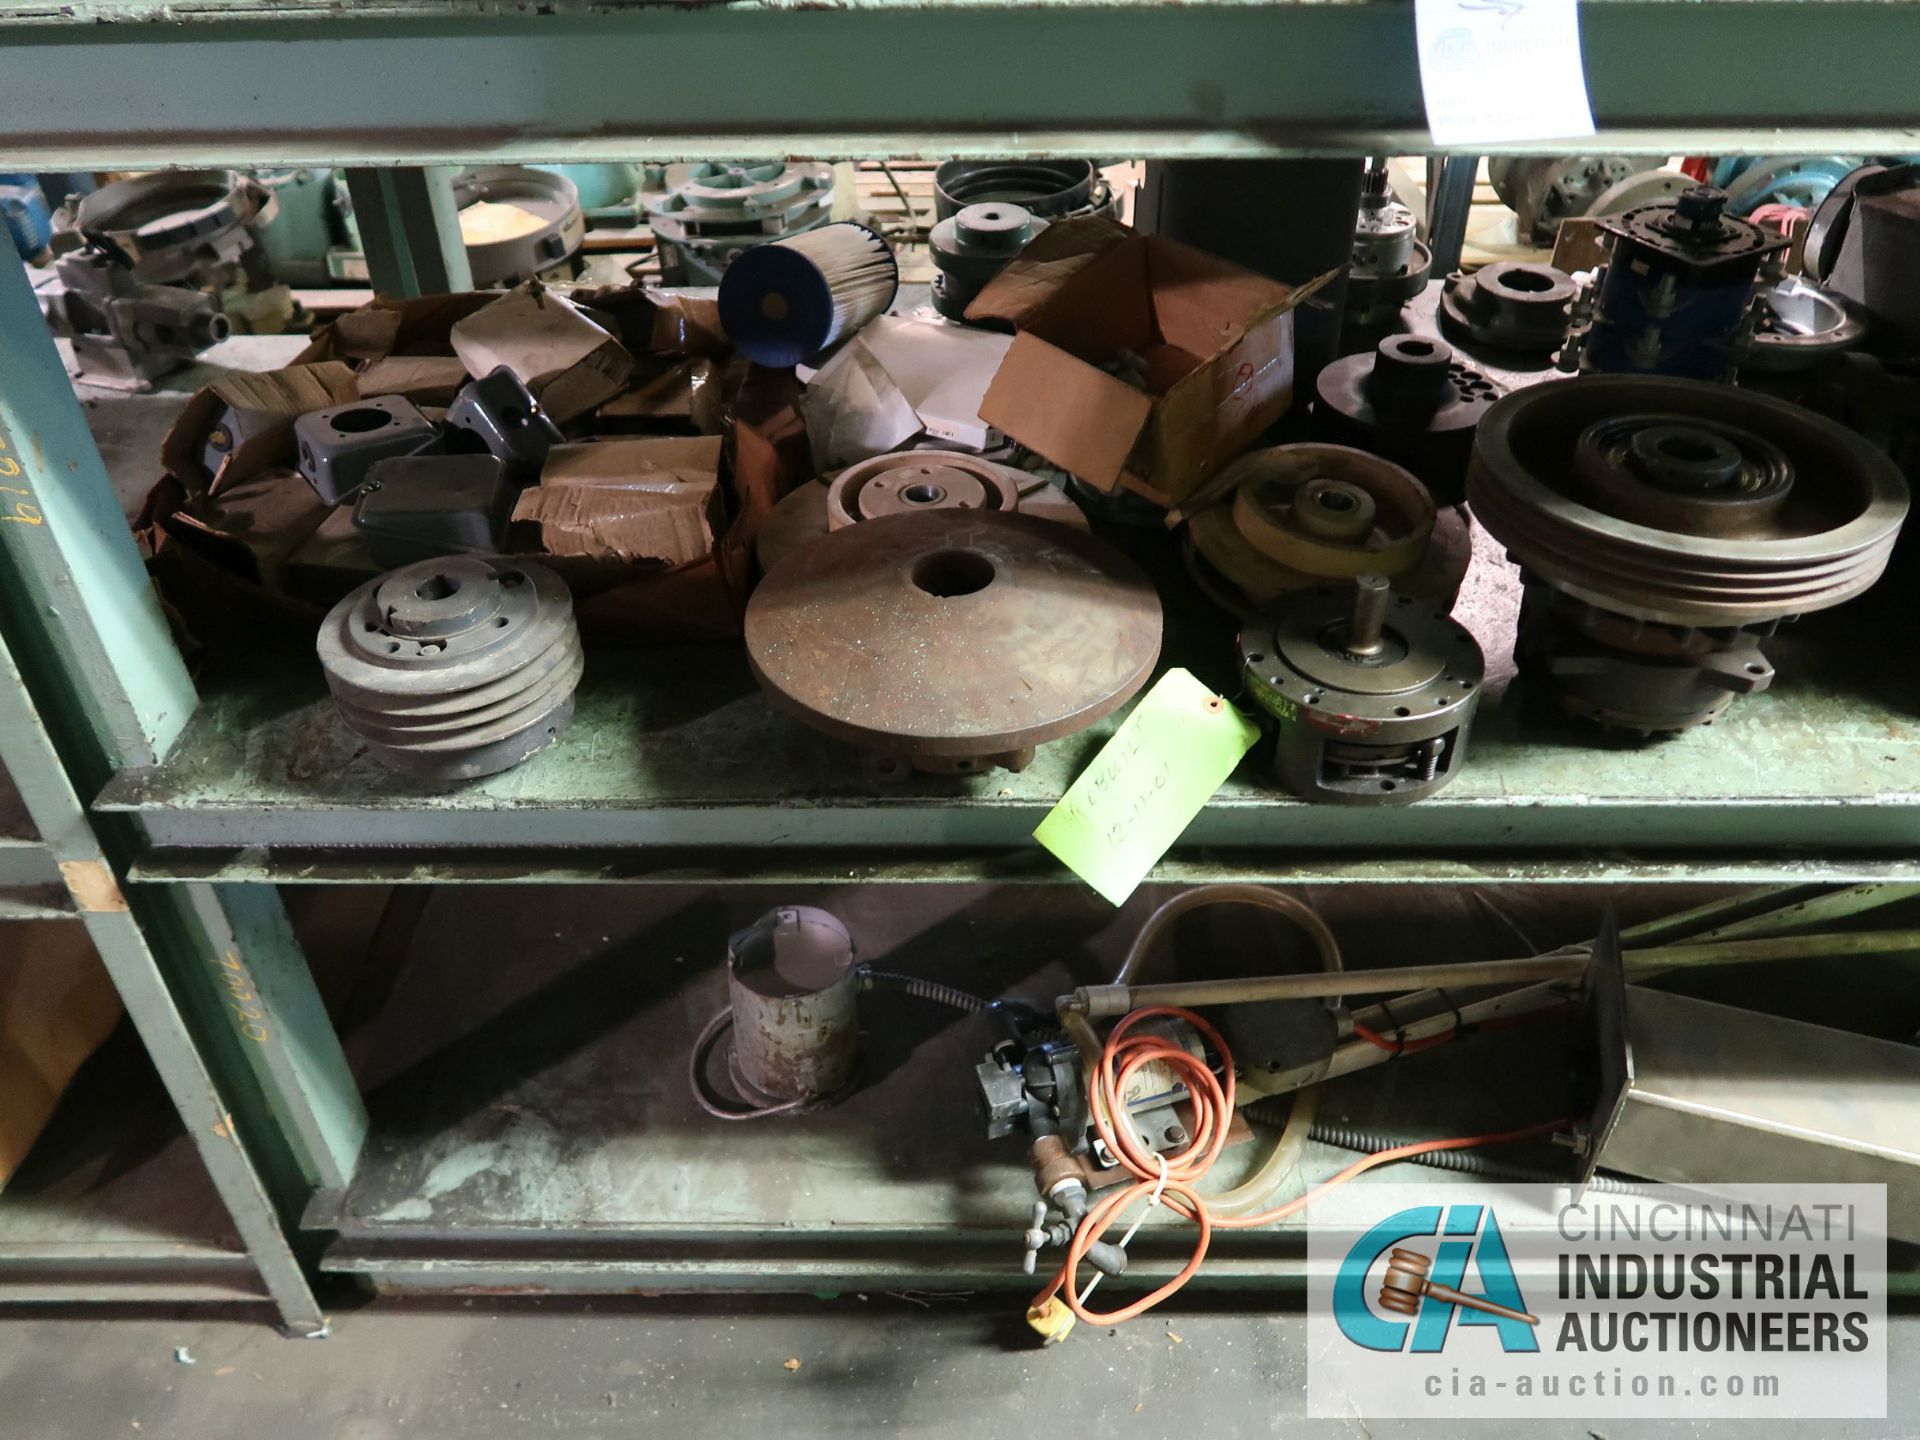 (LOT) MACHINE PARTS, COMPRESSORS, REDUCERS, GEARS, MOTORS, AND OTHER (4) SECTIONS RACK - Image 14 of 28